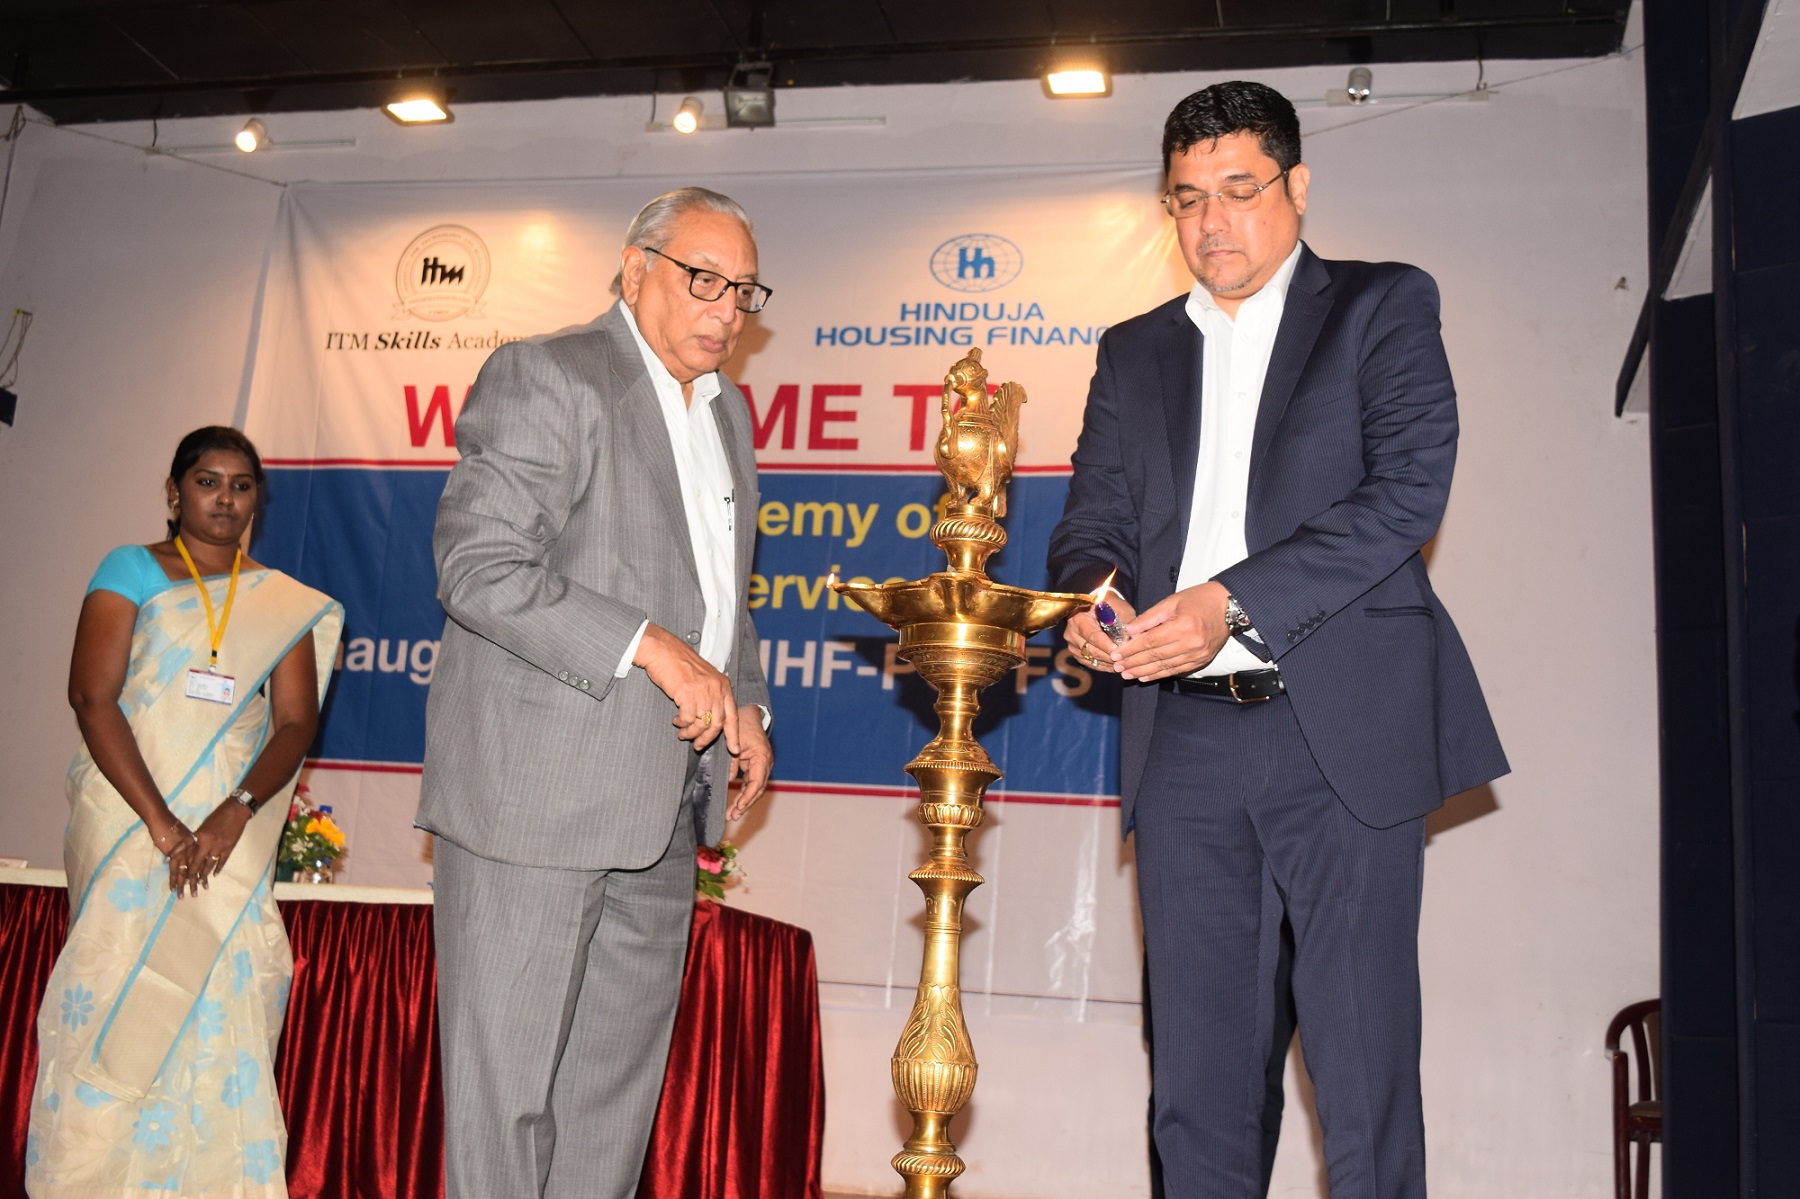 (Right) Mr. Sachin Pillai (Managing Director, Hinduja Housing Finance) lighting the lamp at the inauguration of the Post Graduate Diploma Programme in Financial Services as Dr. P. V. Ramana (Chairman, ITM Group of Institution) (Left in picture) looks on.- GPN / Global News Network 